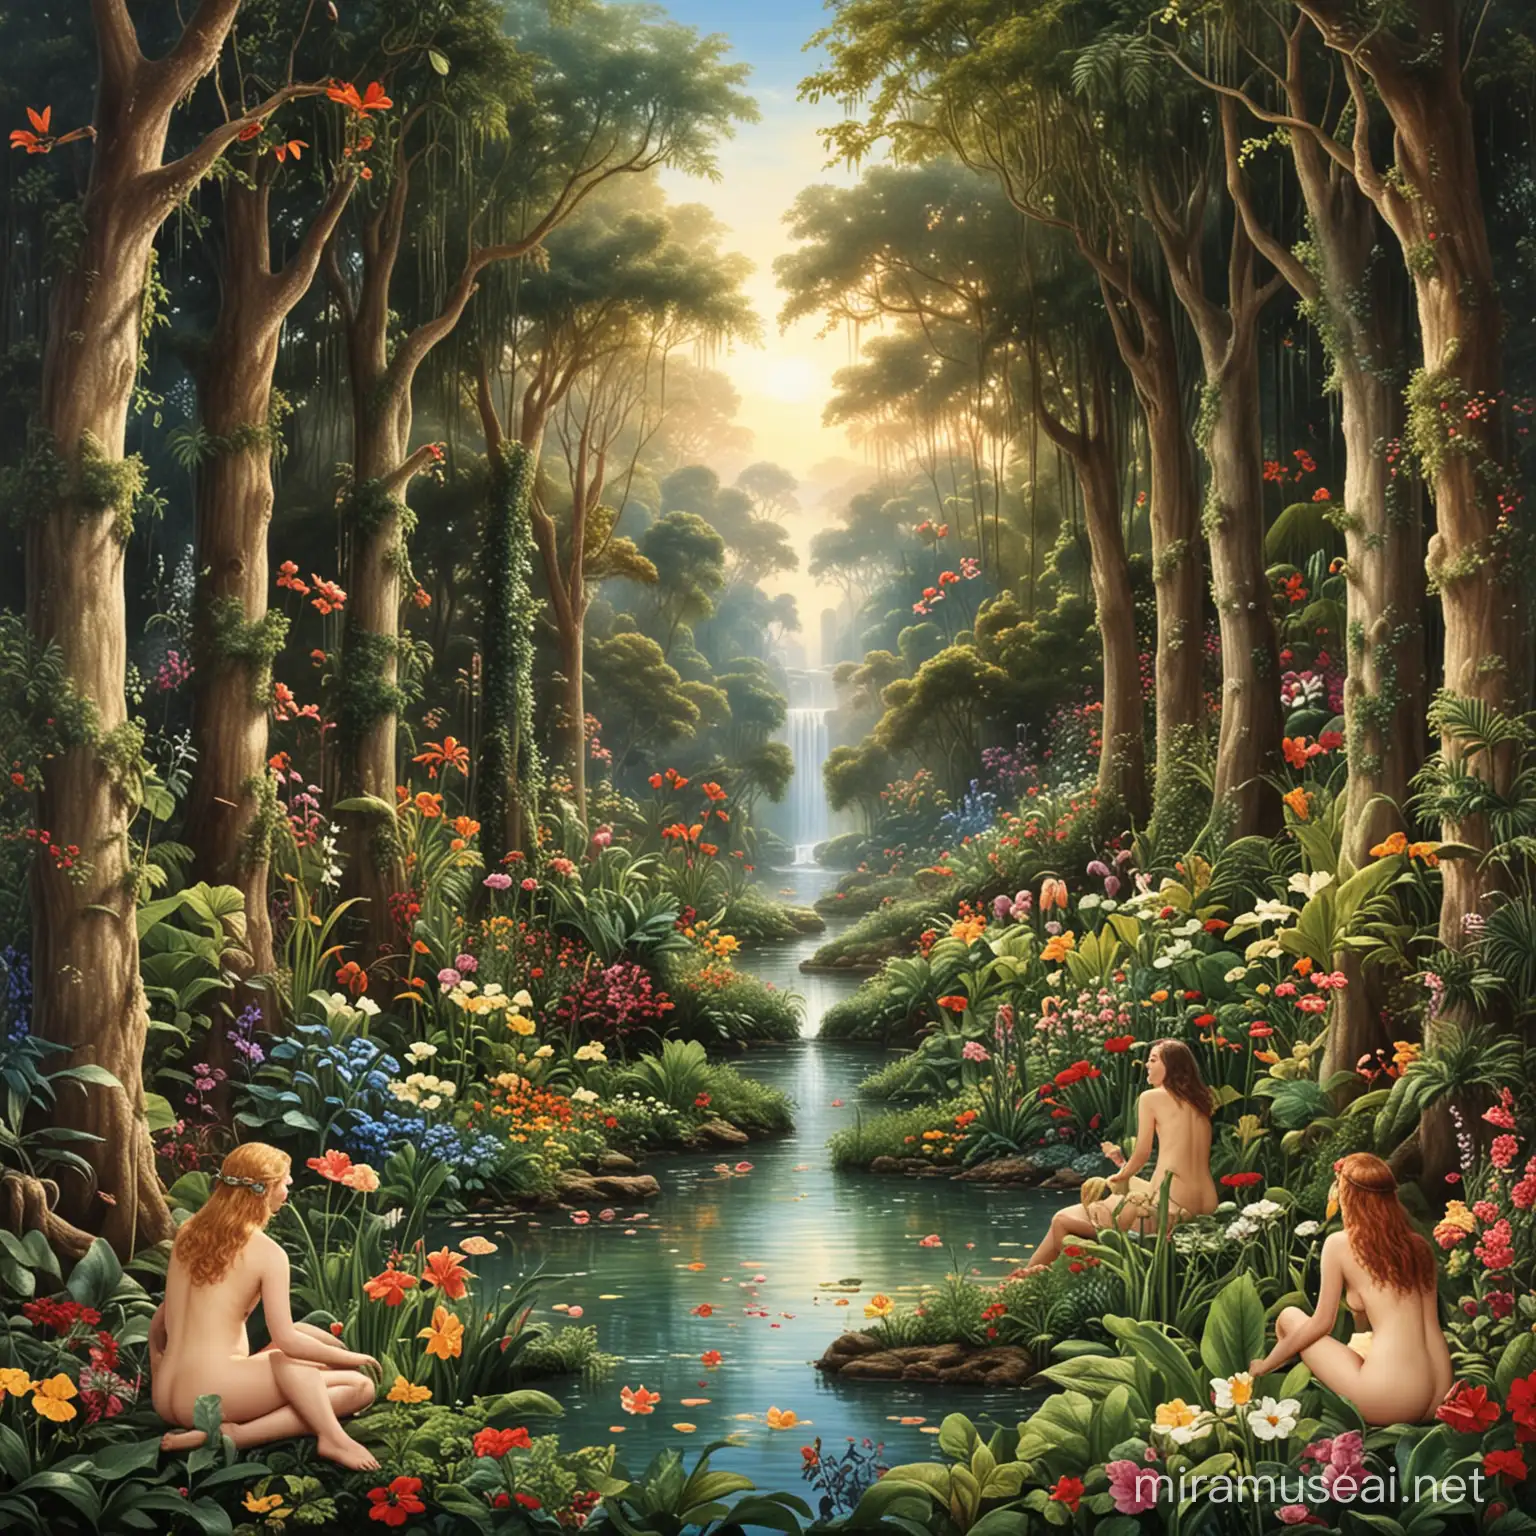 Lush Garden of Eden Landscape with Adam and Eve